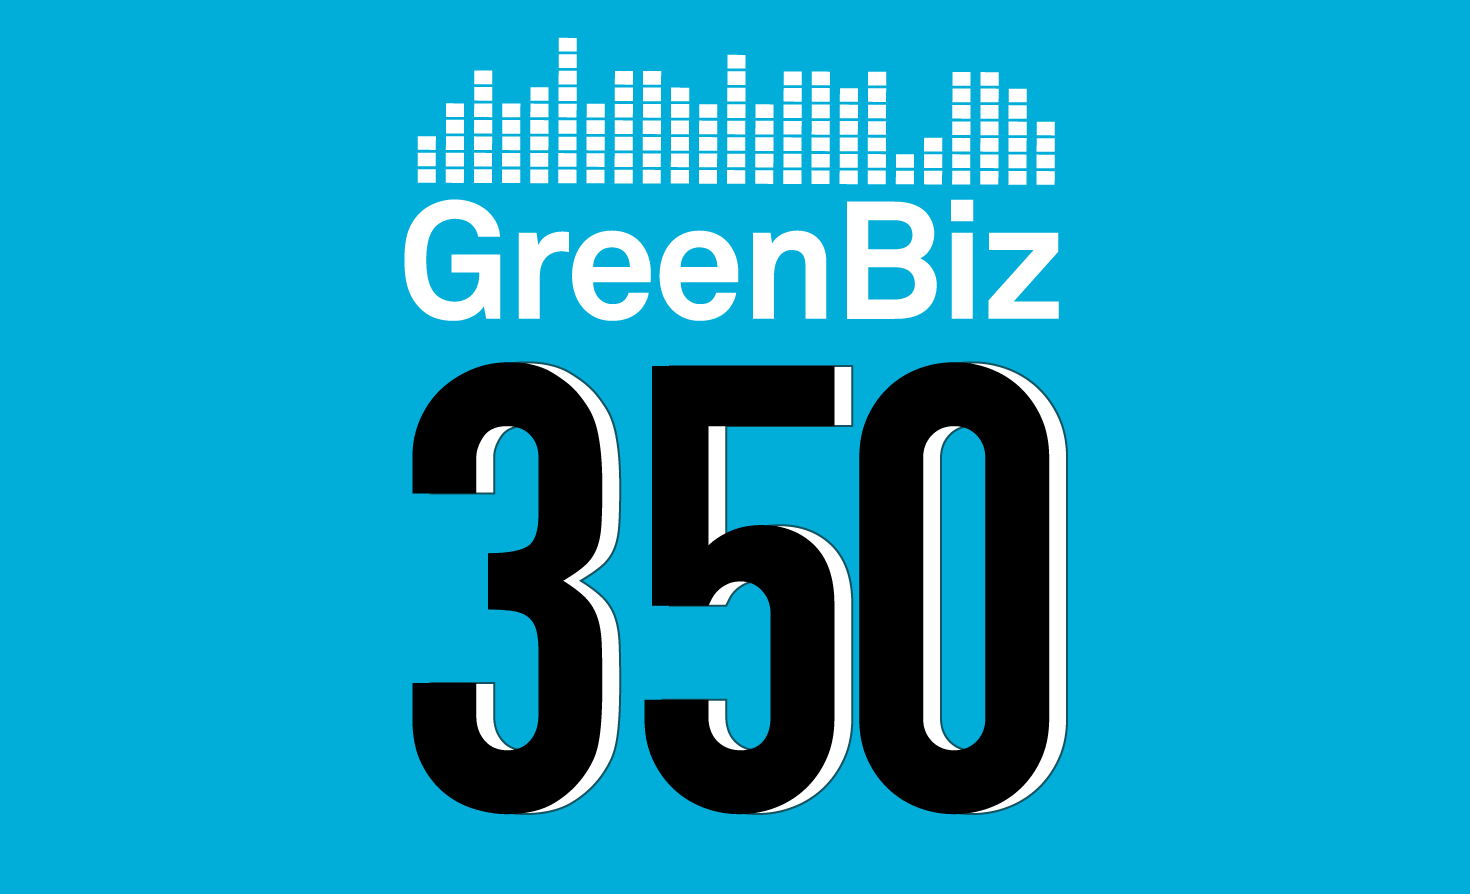 Episode 242: Responsible mining, the politics of clean energy